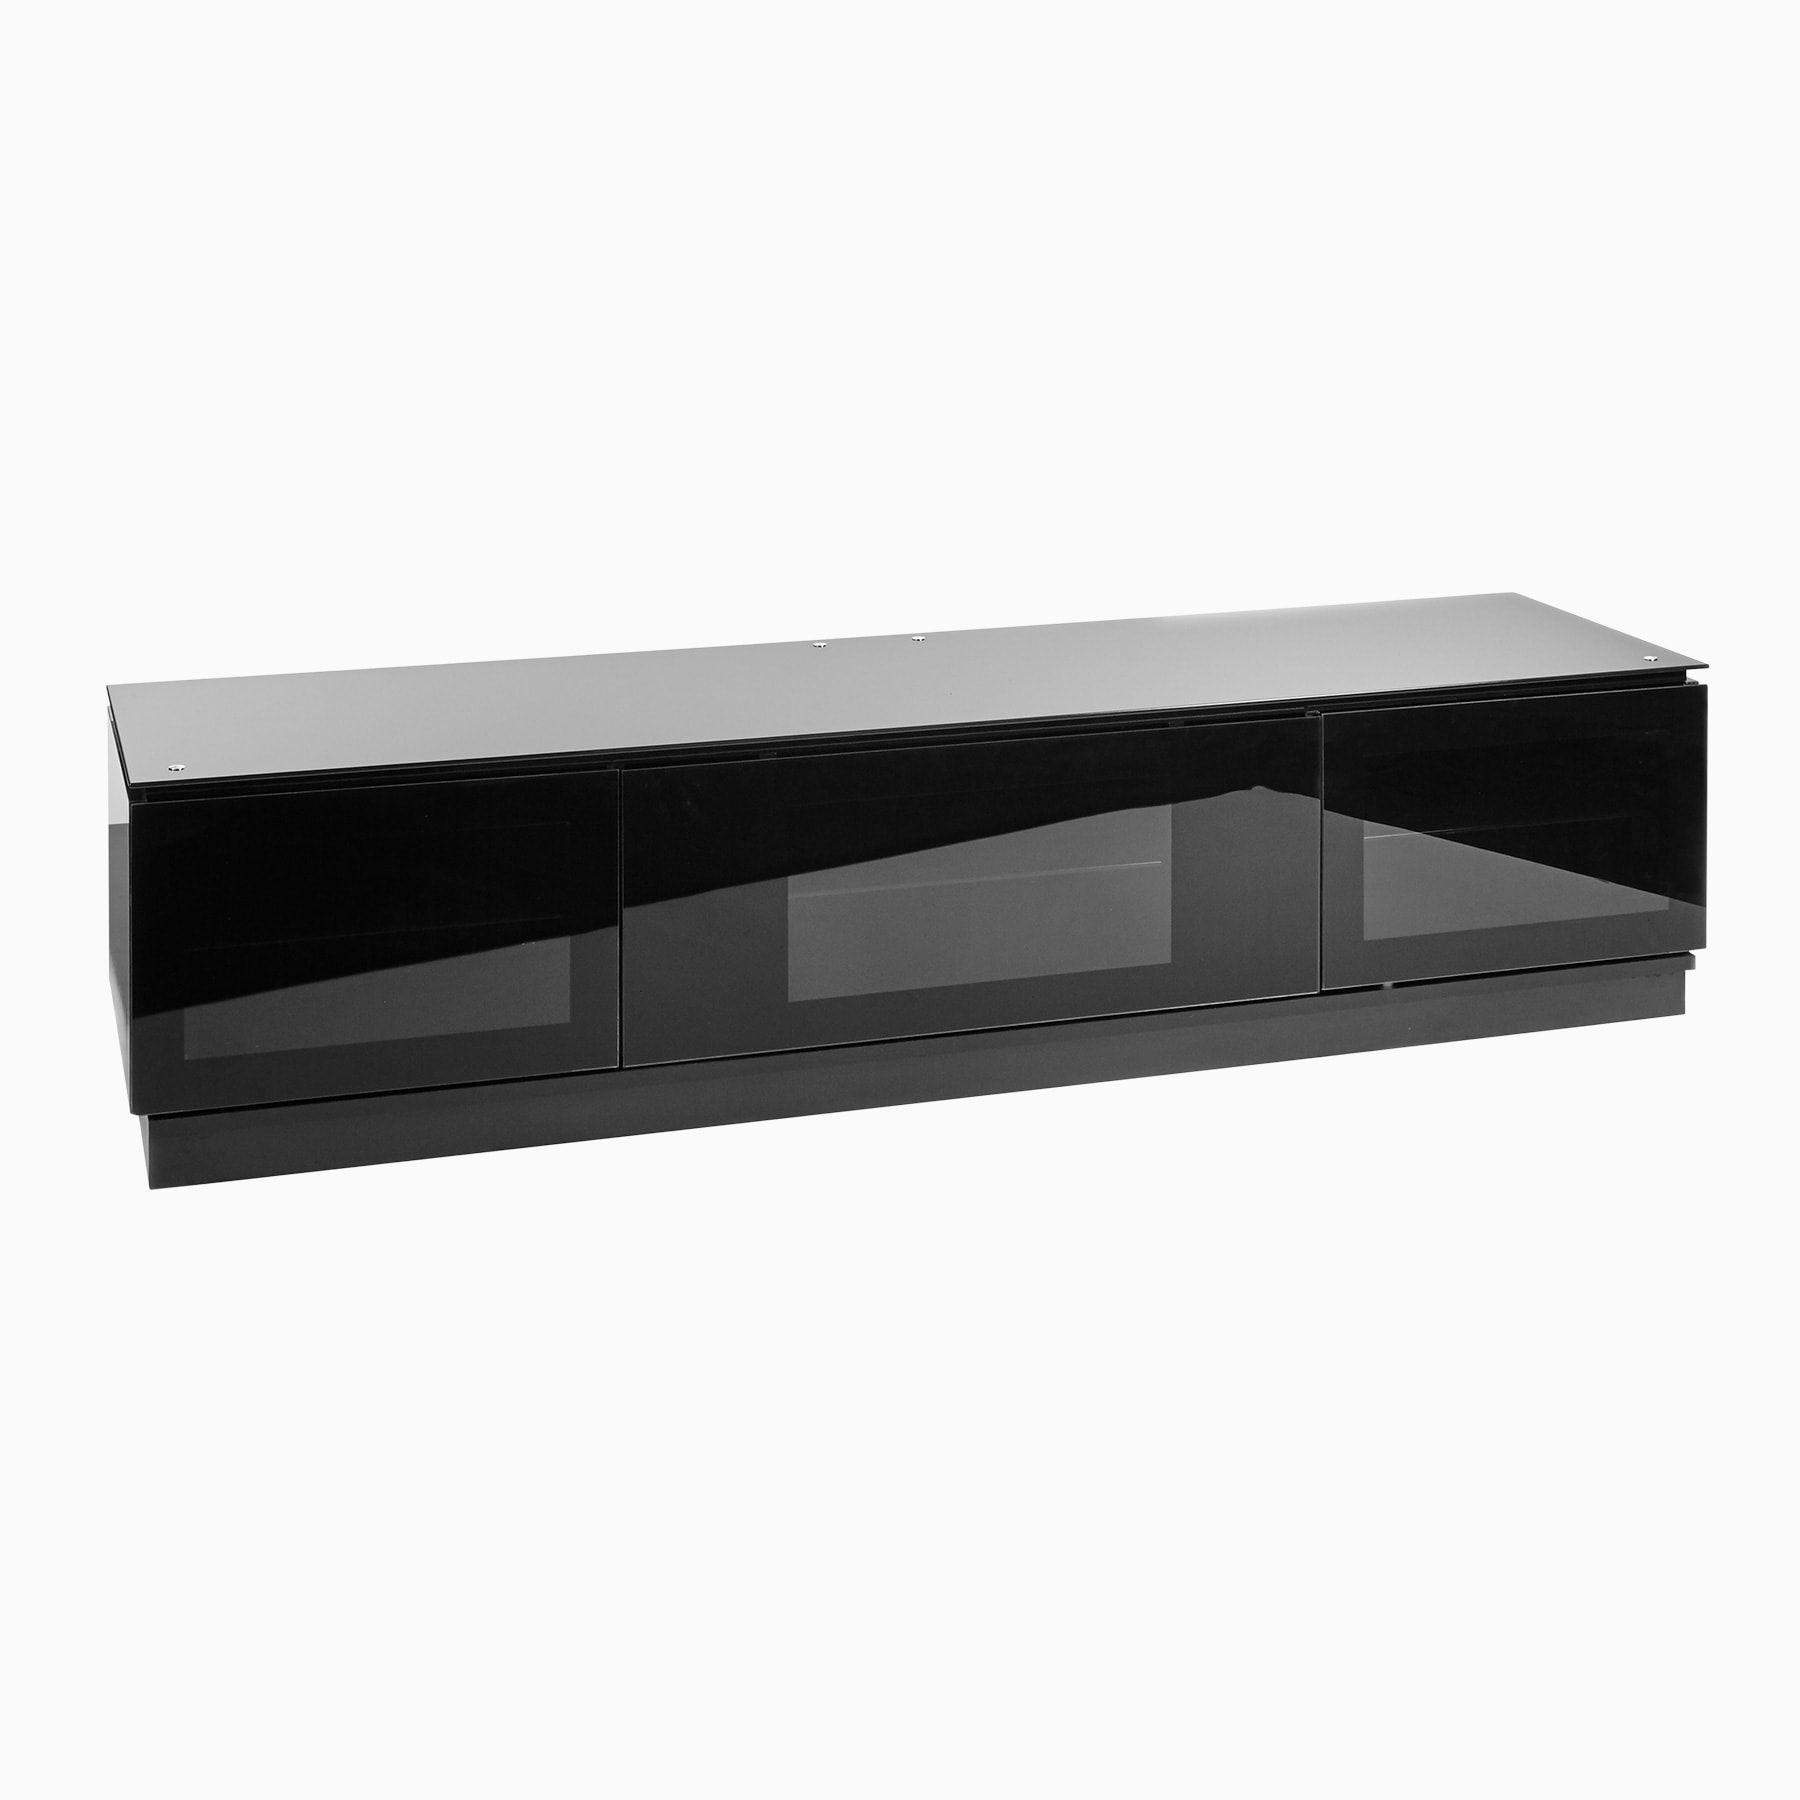 Black Gloss Tv Unit Up To 80 Inch Flat Screen Tv | Mmt D1800 In Black Gloss Tv Cabinets (View 14 of 15)